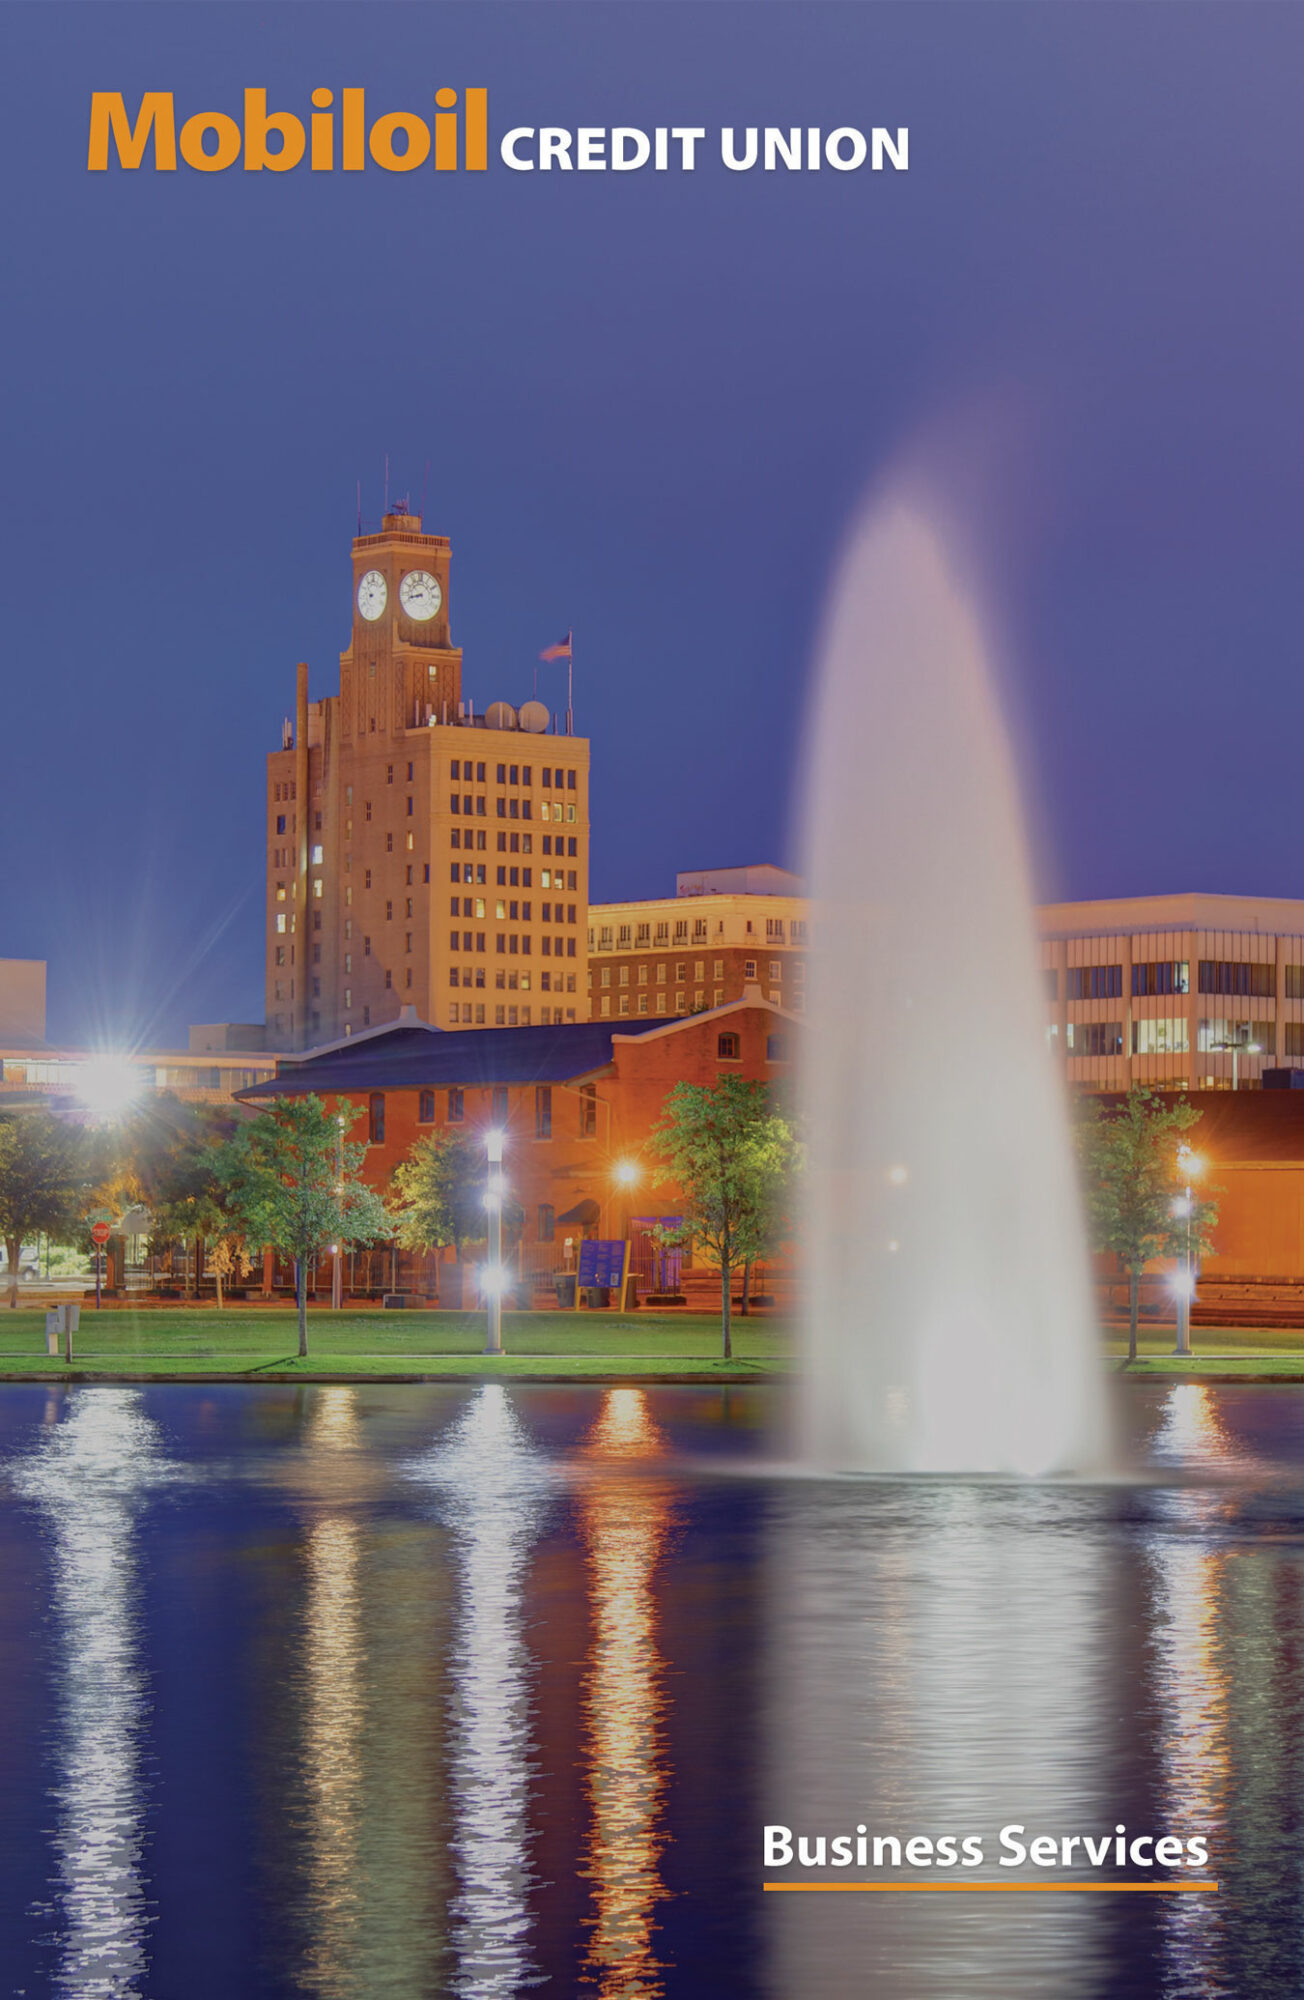 Business Services Front Cover - Image of Downtown beaumont water fountation with clock tower in background